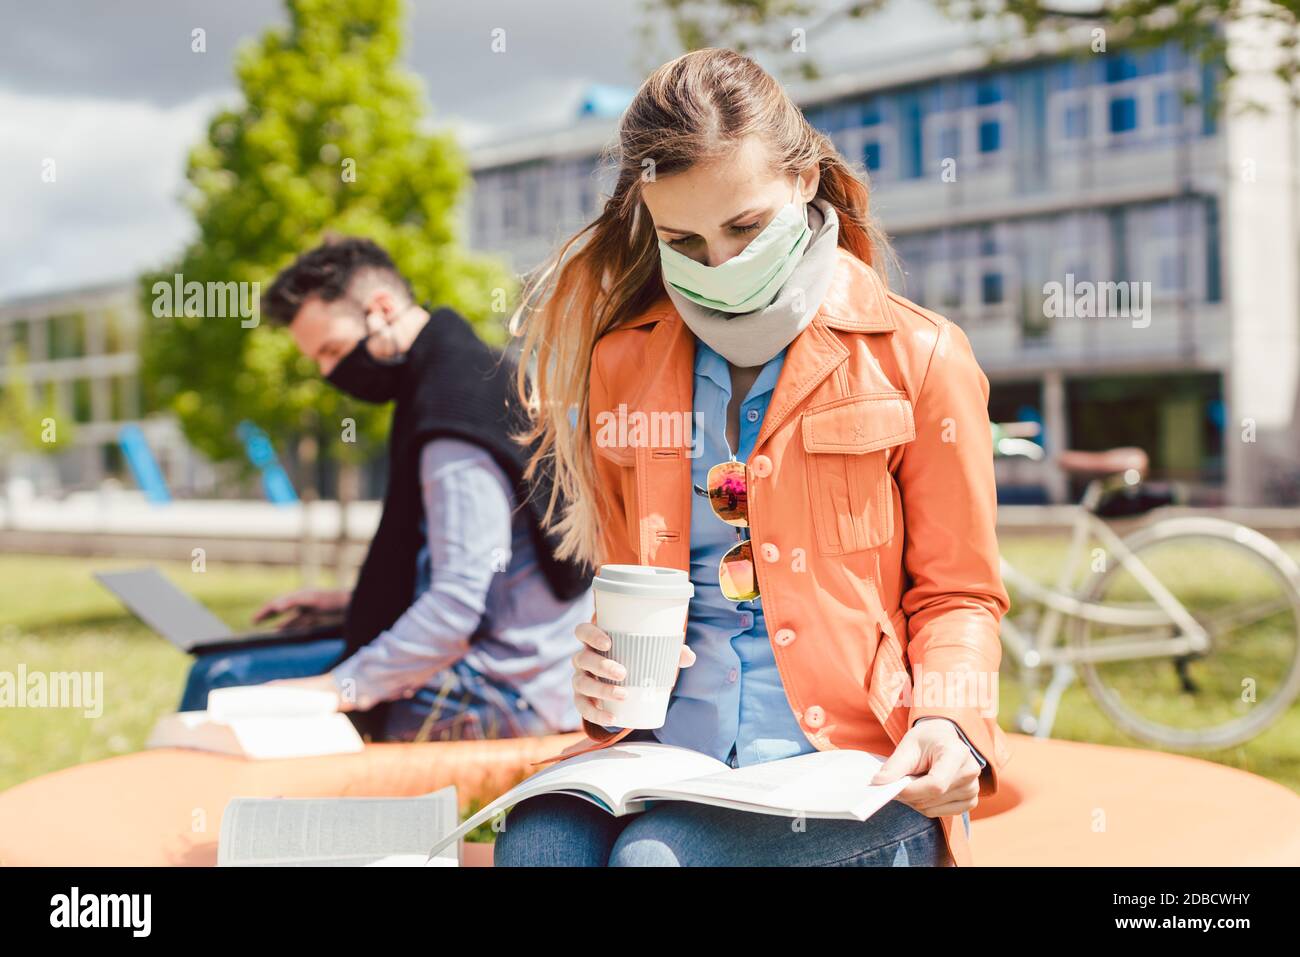 Man and woman practicing social distancing in university while learning and reading Stock Photo